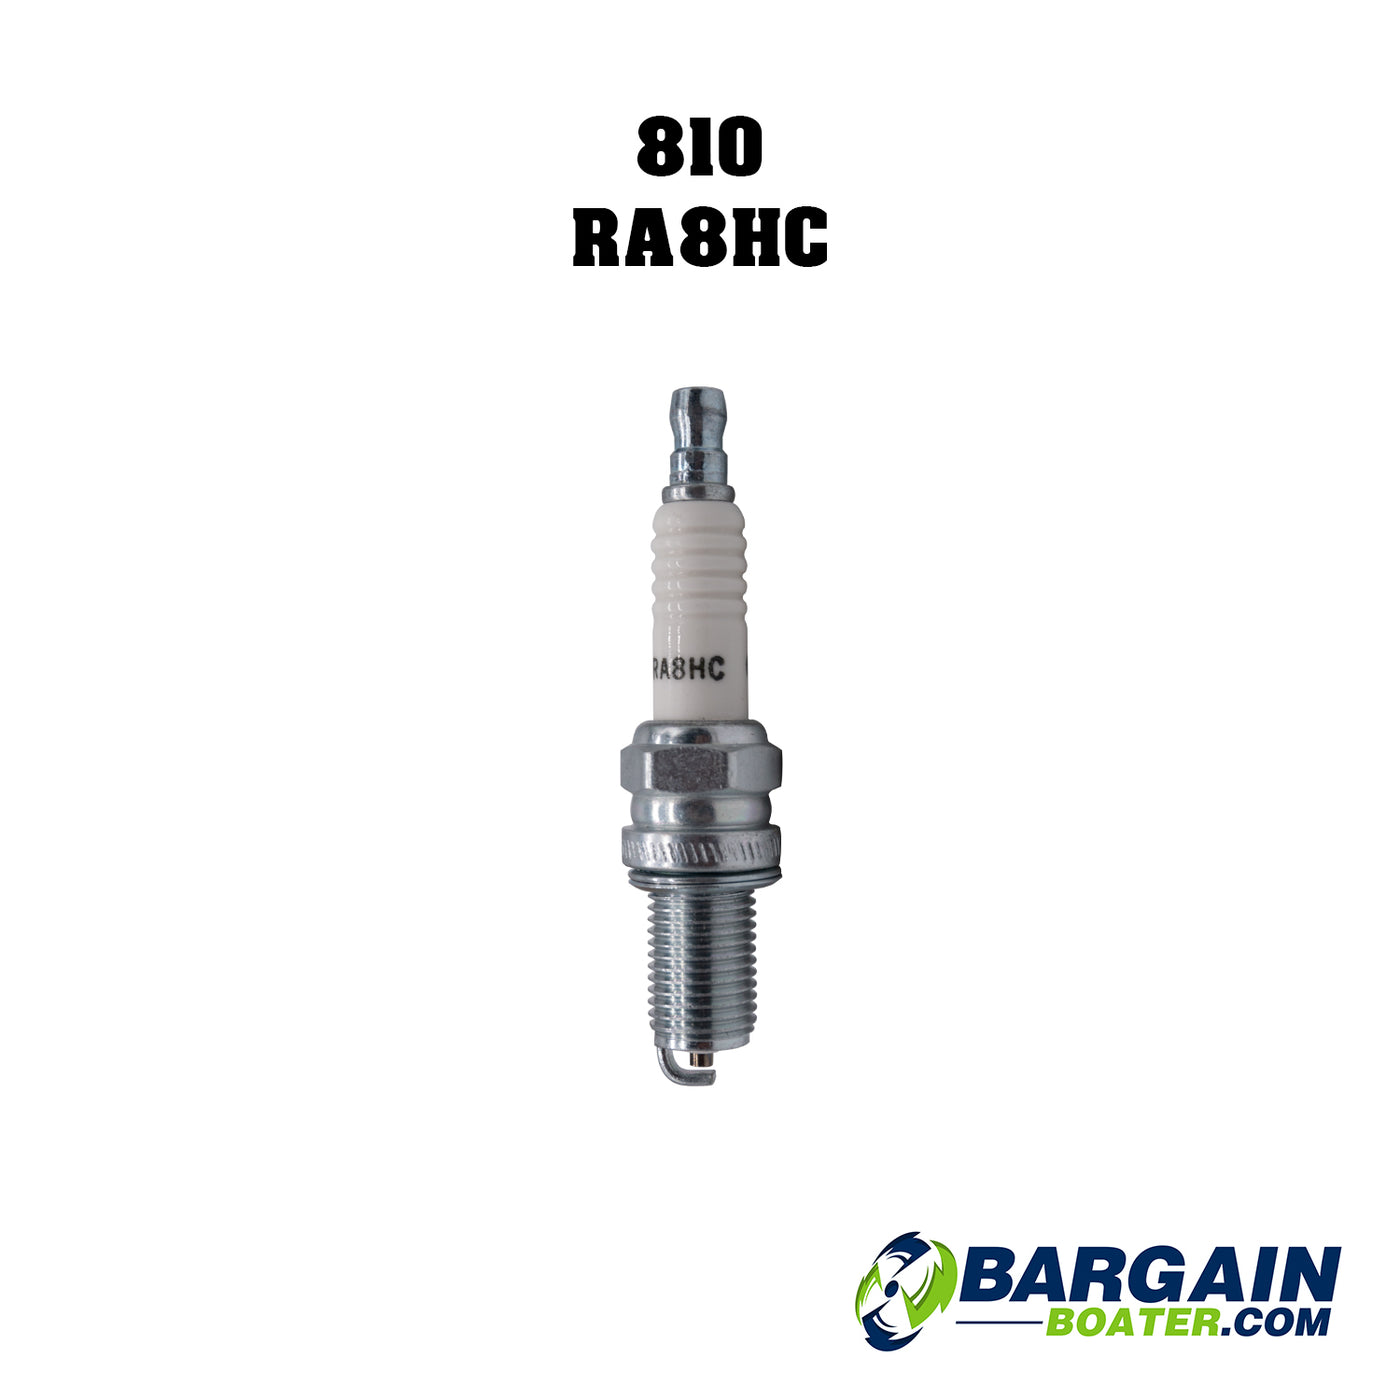 This is an NGK 810 RA8HC Spark Plug for Evinrude 4-Stroke outboard motors (0584918).